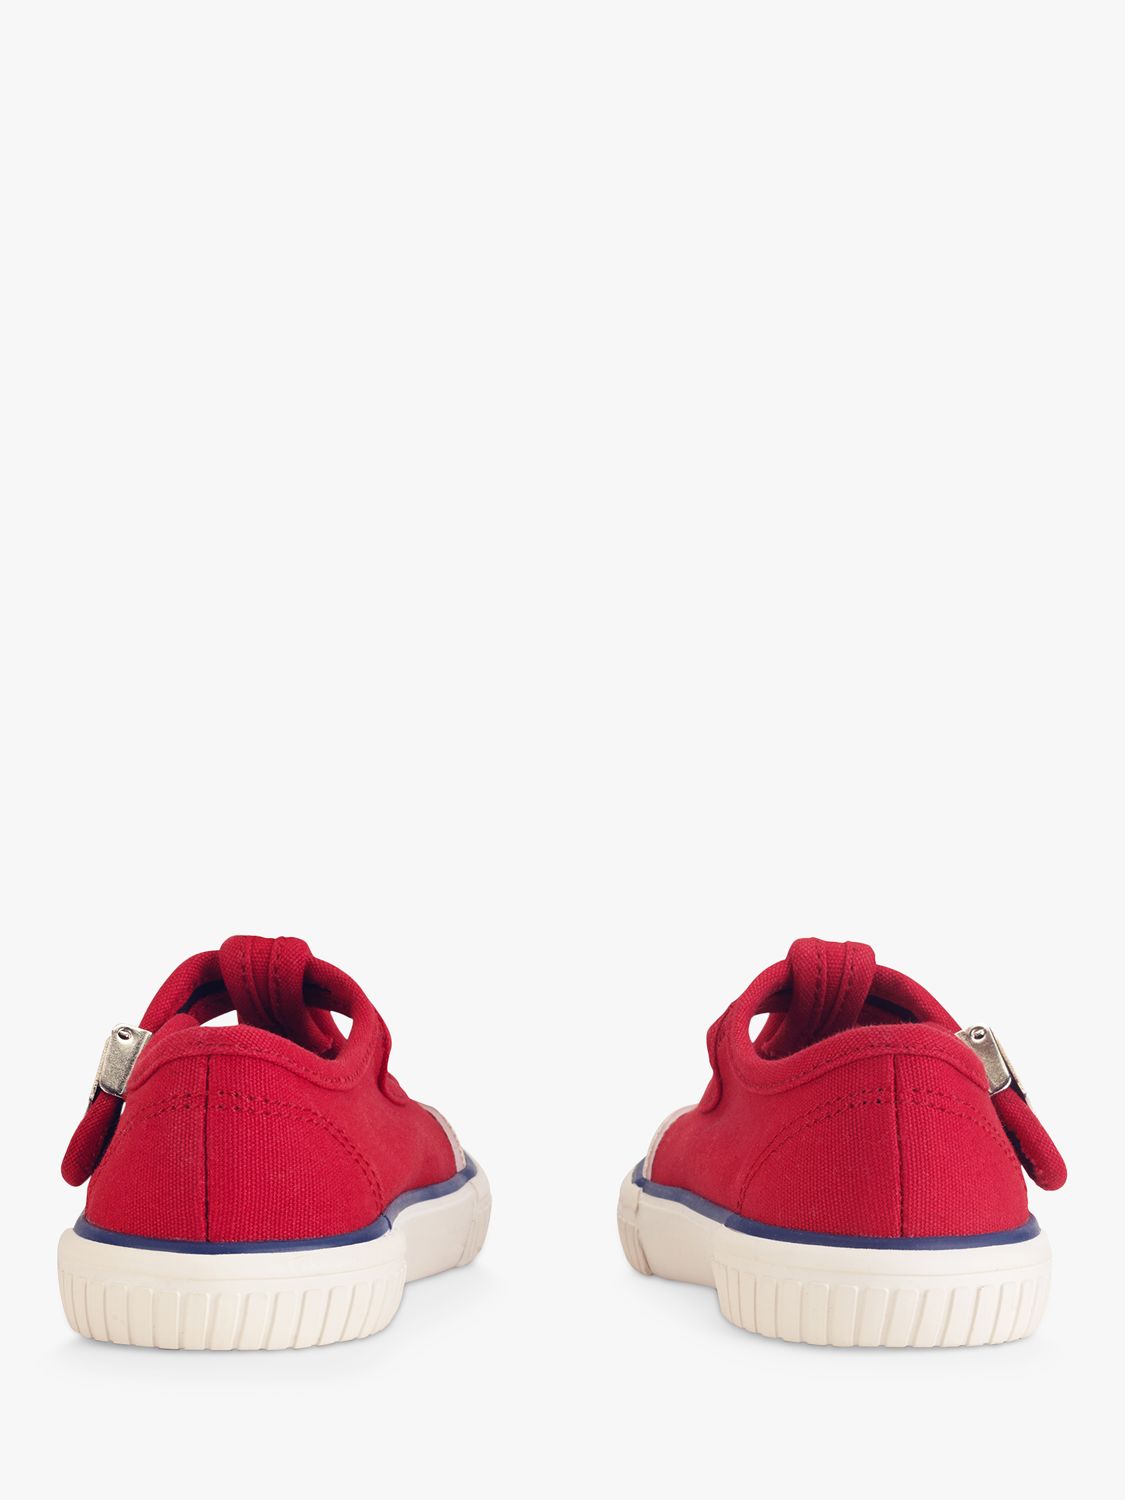 Start-Rite’s Kids' Anchor Canvas Shoes, Red, 6F Jnr